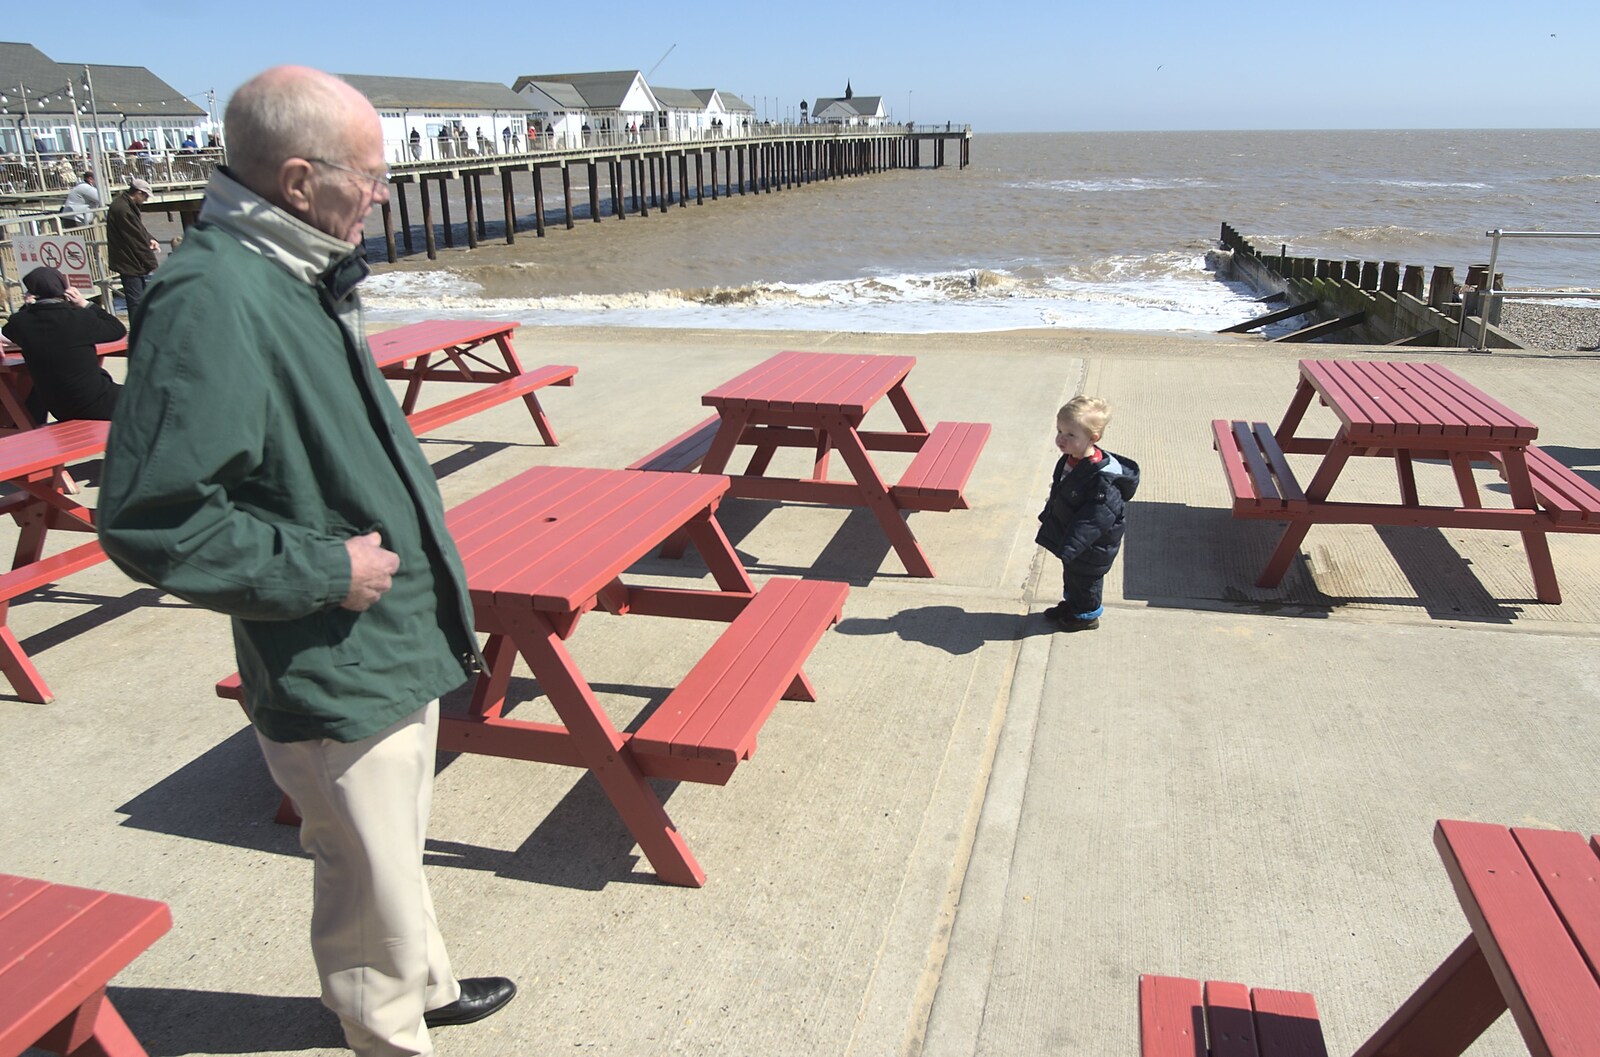 Grandad and The Boy mill around Southwold prom from Stupid Volcanic Ash: Southwold and Stuston Farm Shop, Suffolk - 18th April 2010